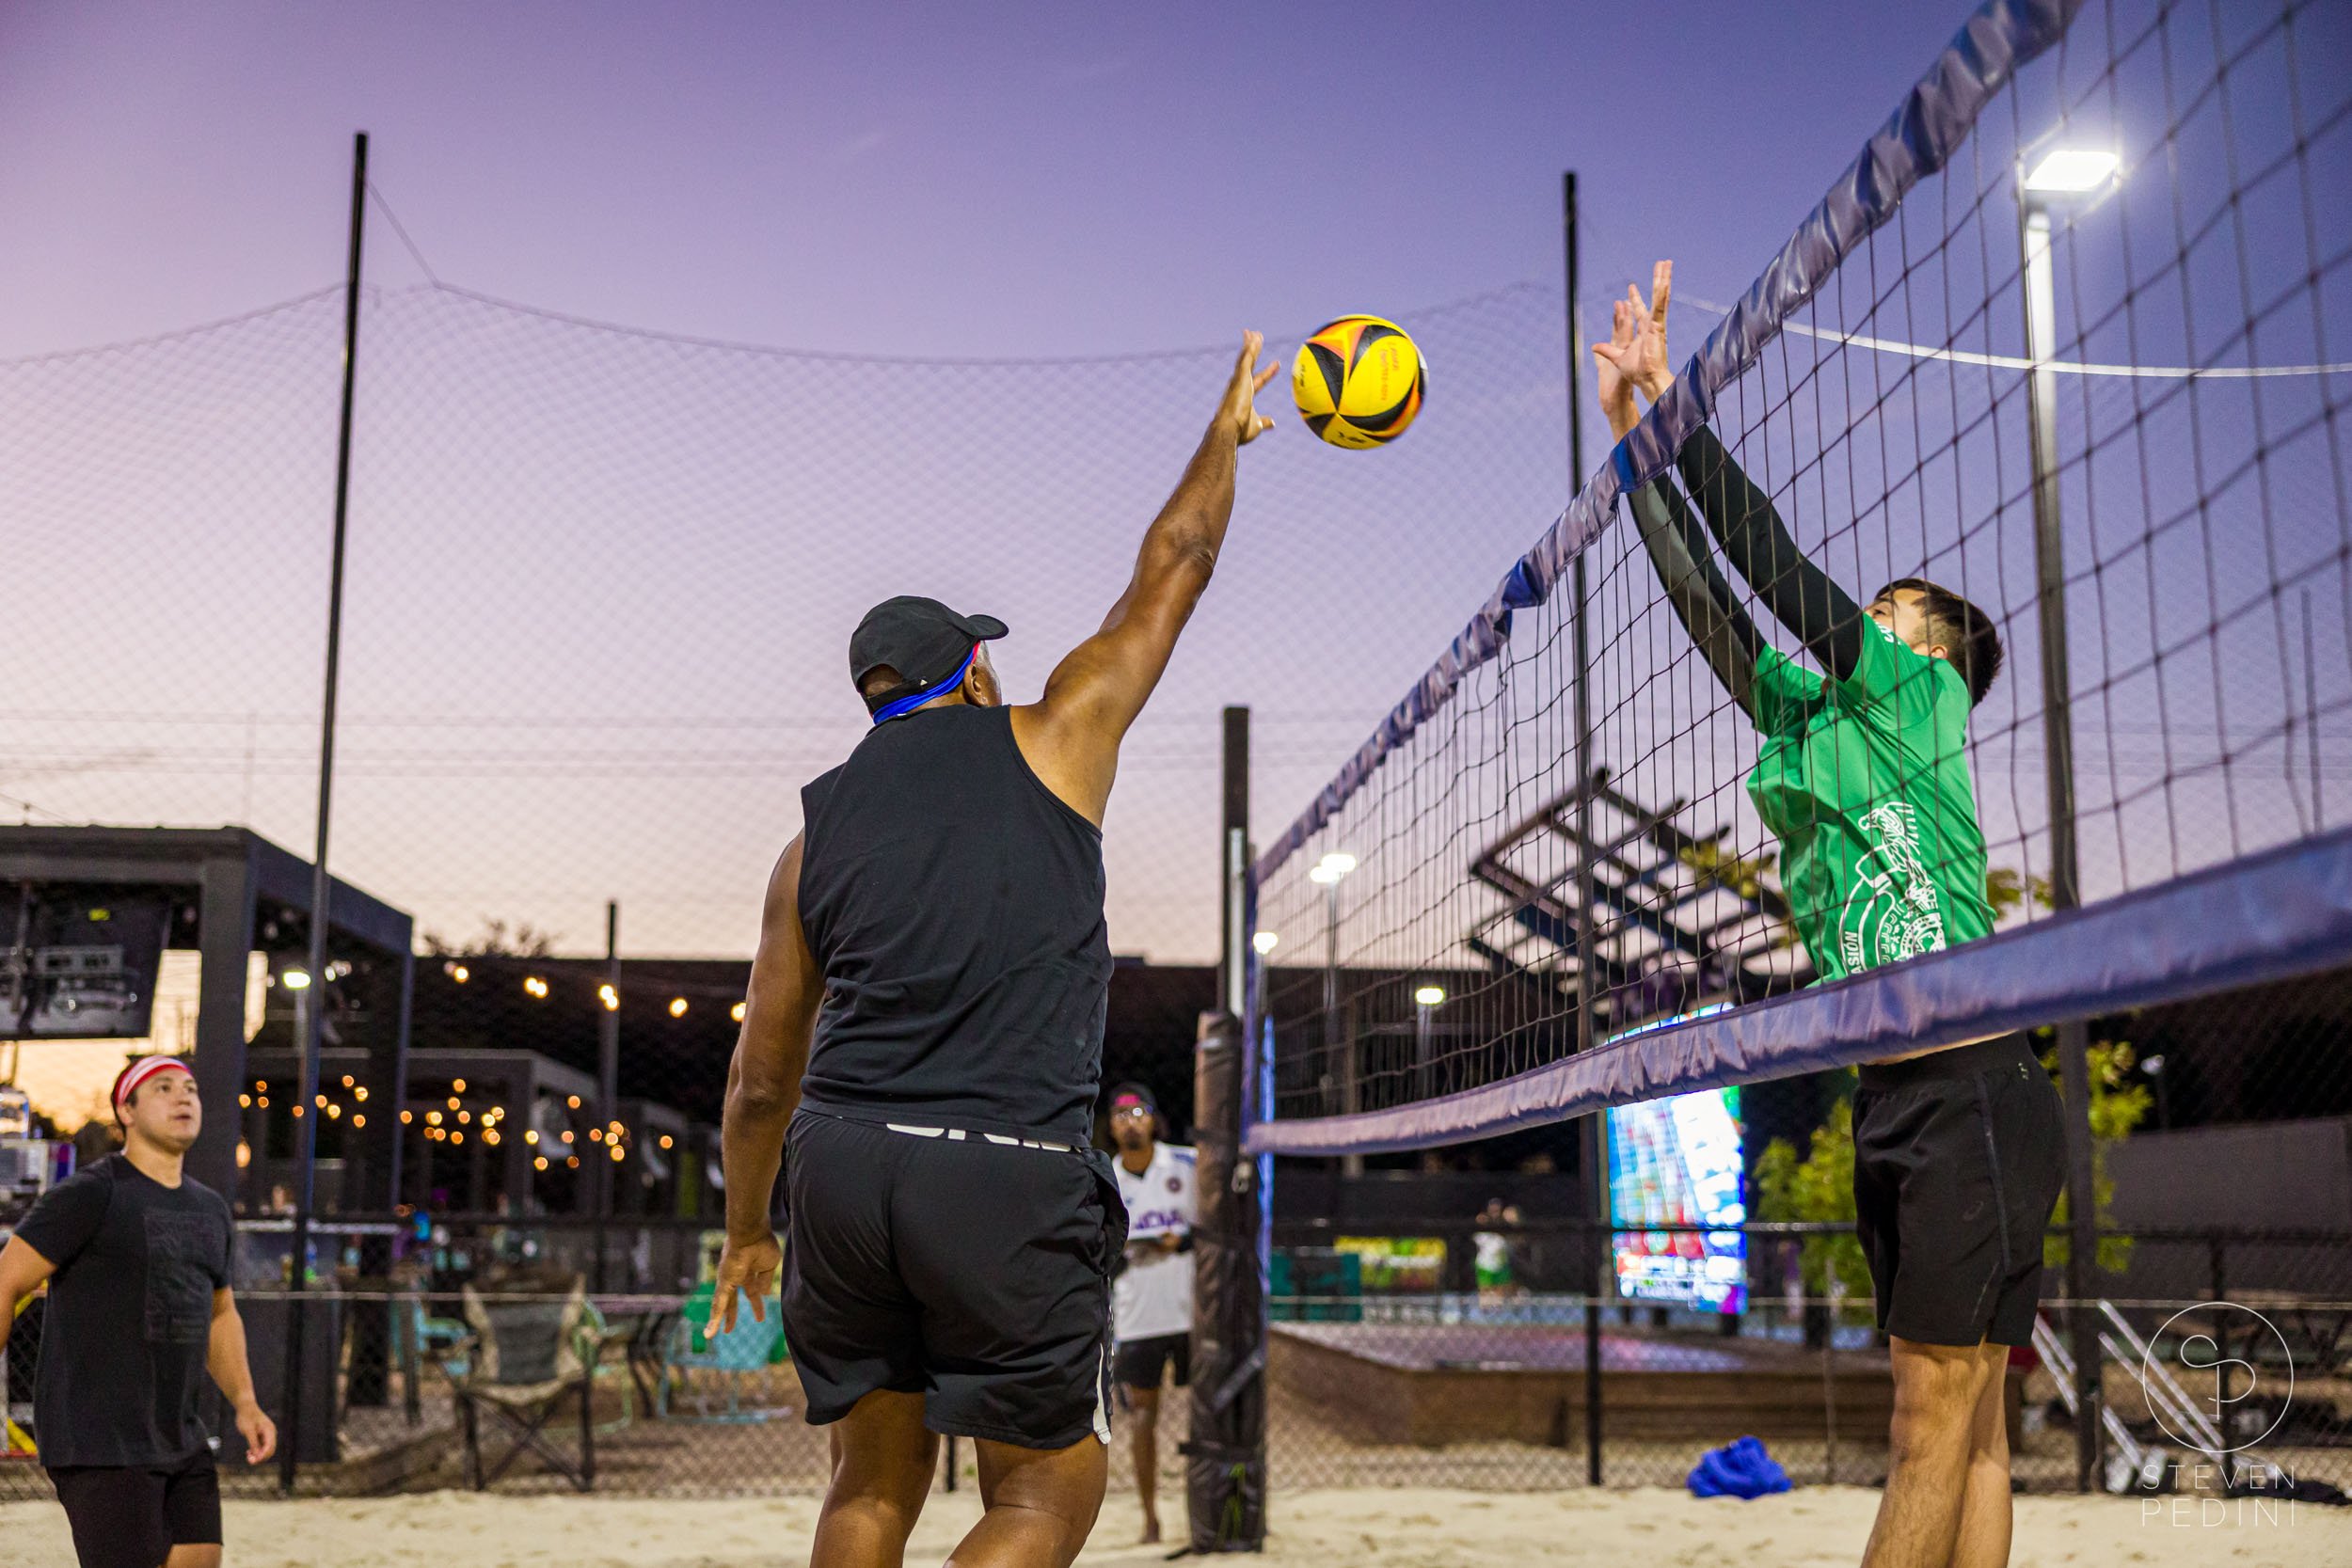 Steven Pedini Photography - Bumpy Pickle - Sand Volleyball - Houston TX - World Cup of Volleyball - 00306.jpg